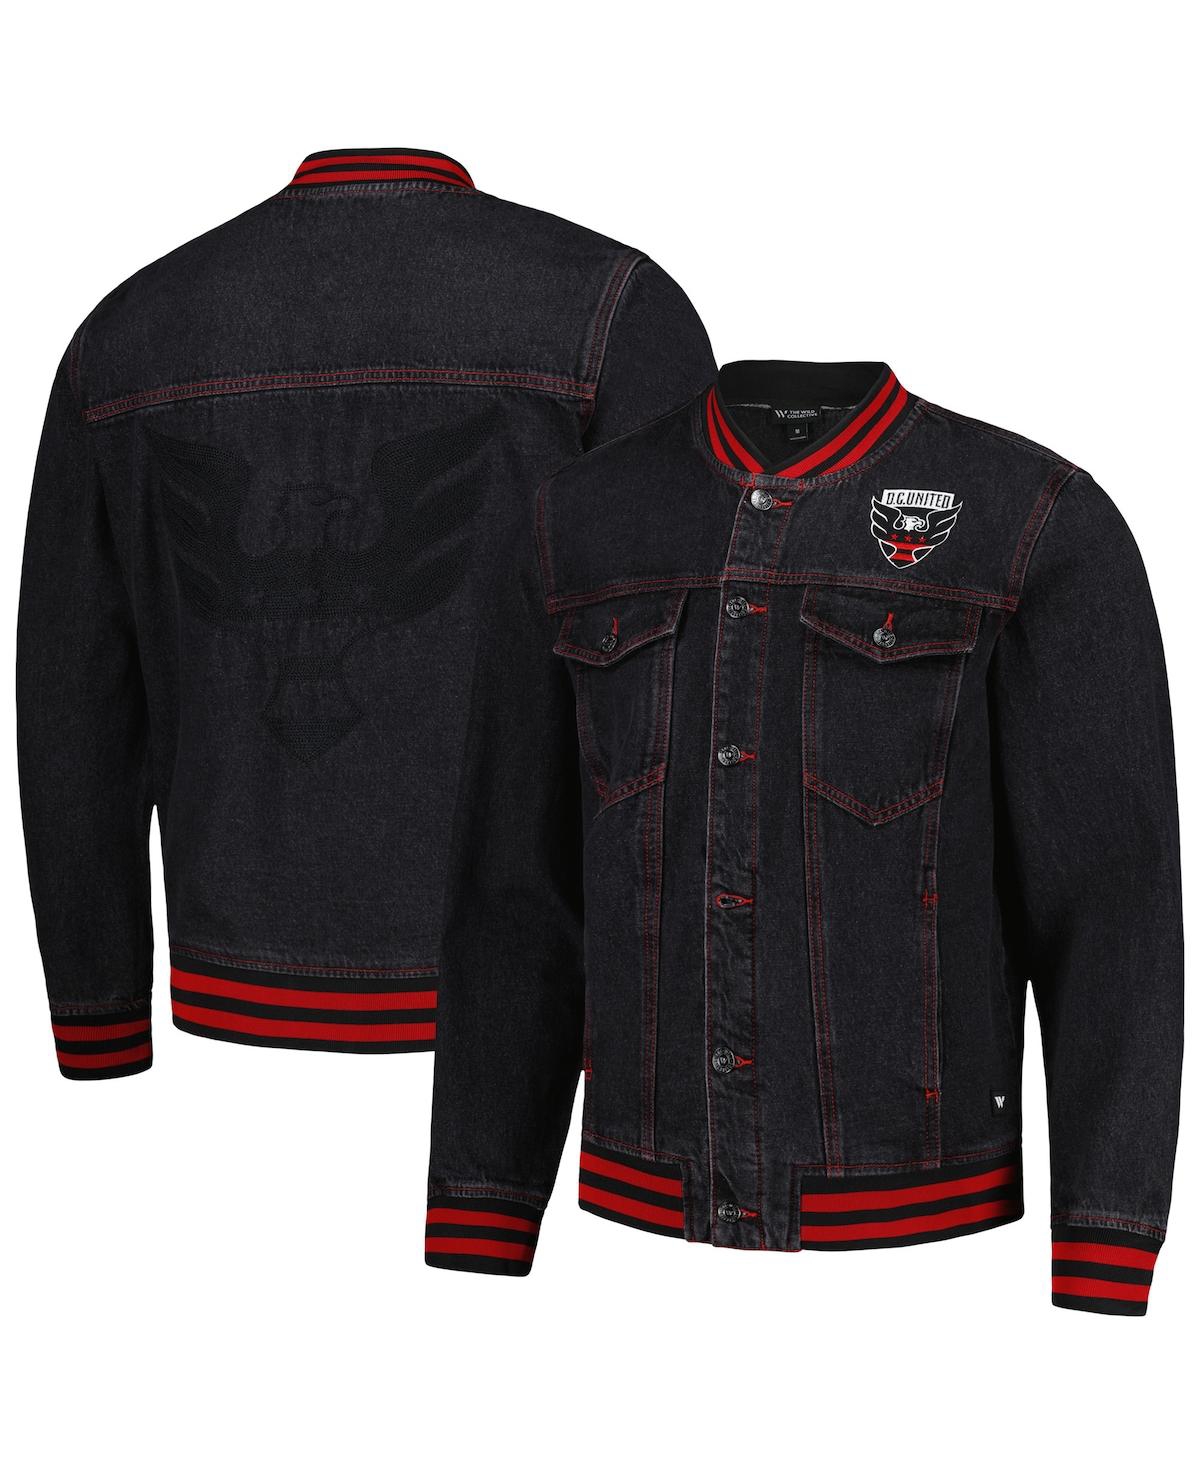 THE WILD COLLECTIVE MEN'S THE WILD COLLECTIVE BLACK D.C. UNITED DENIM FULL-BUTTON BOMBER JACKET